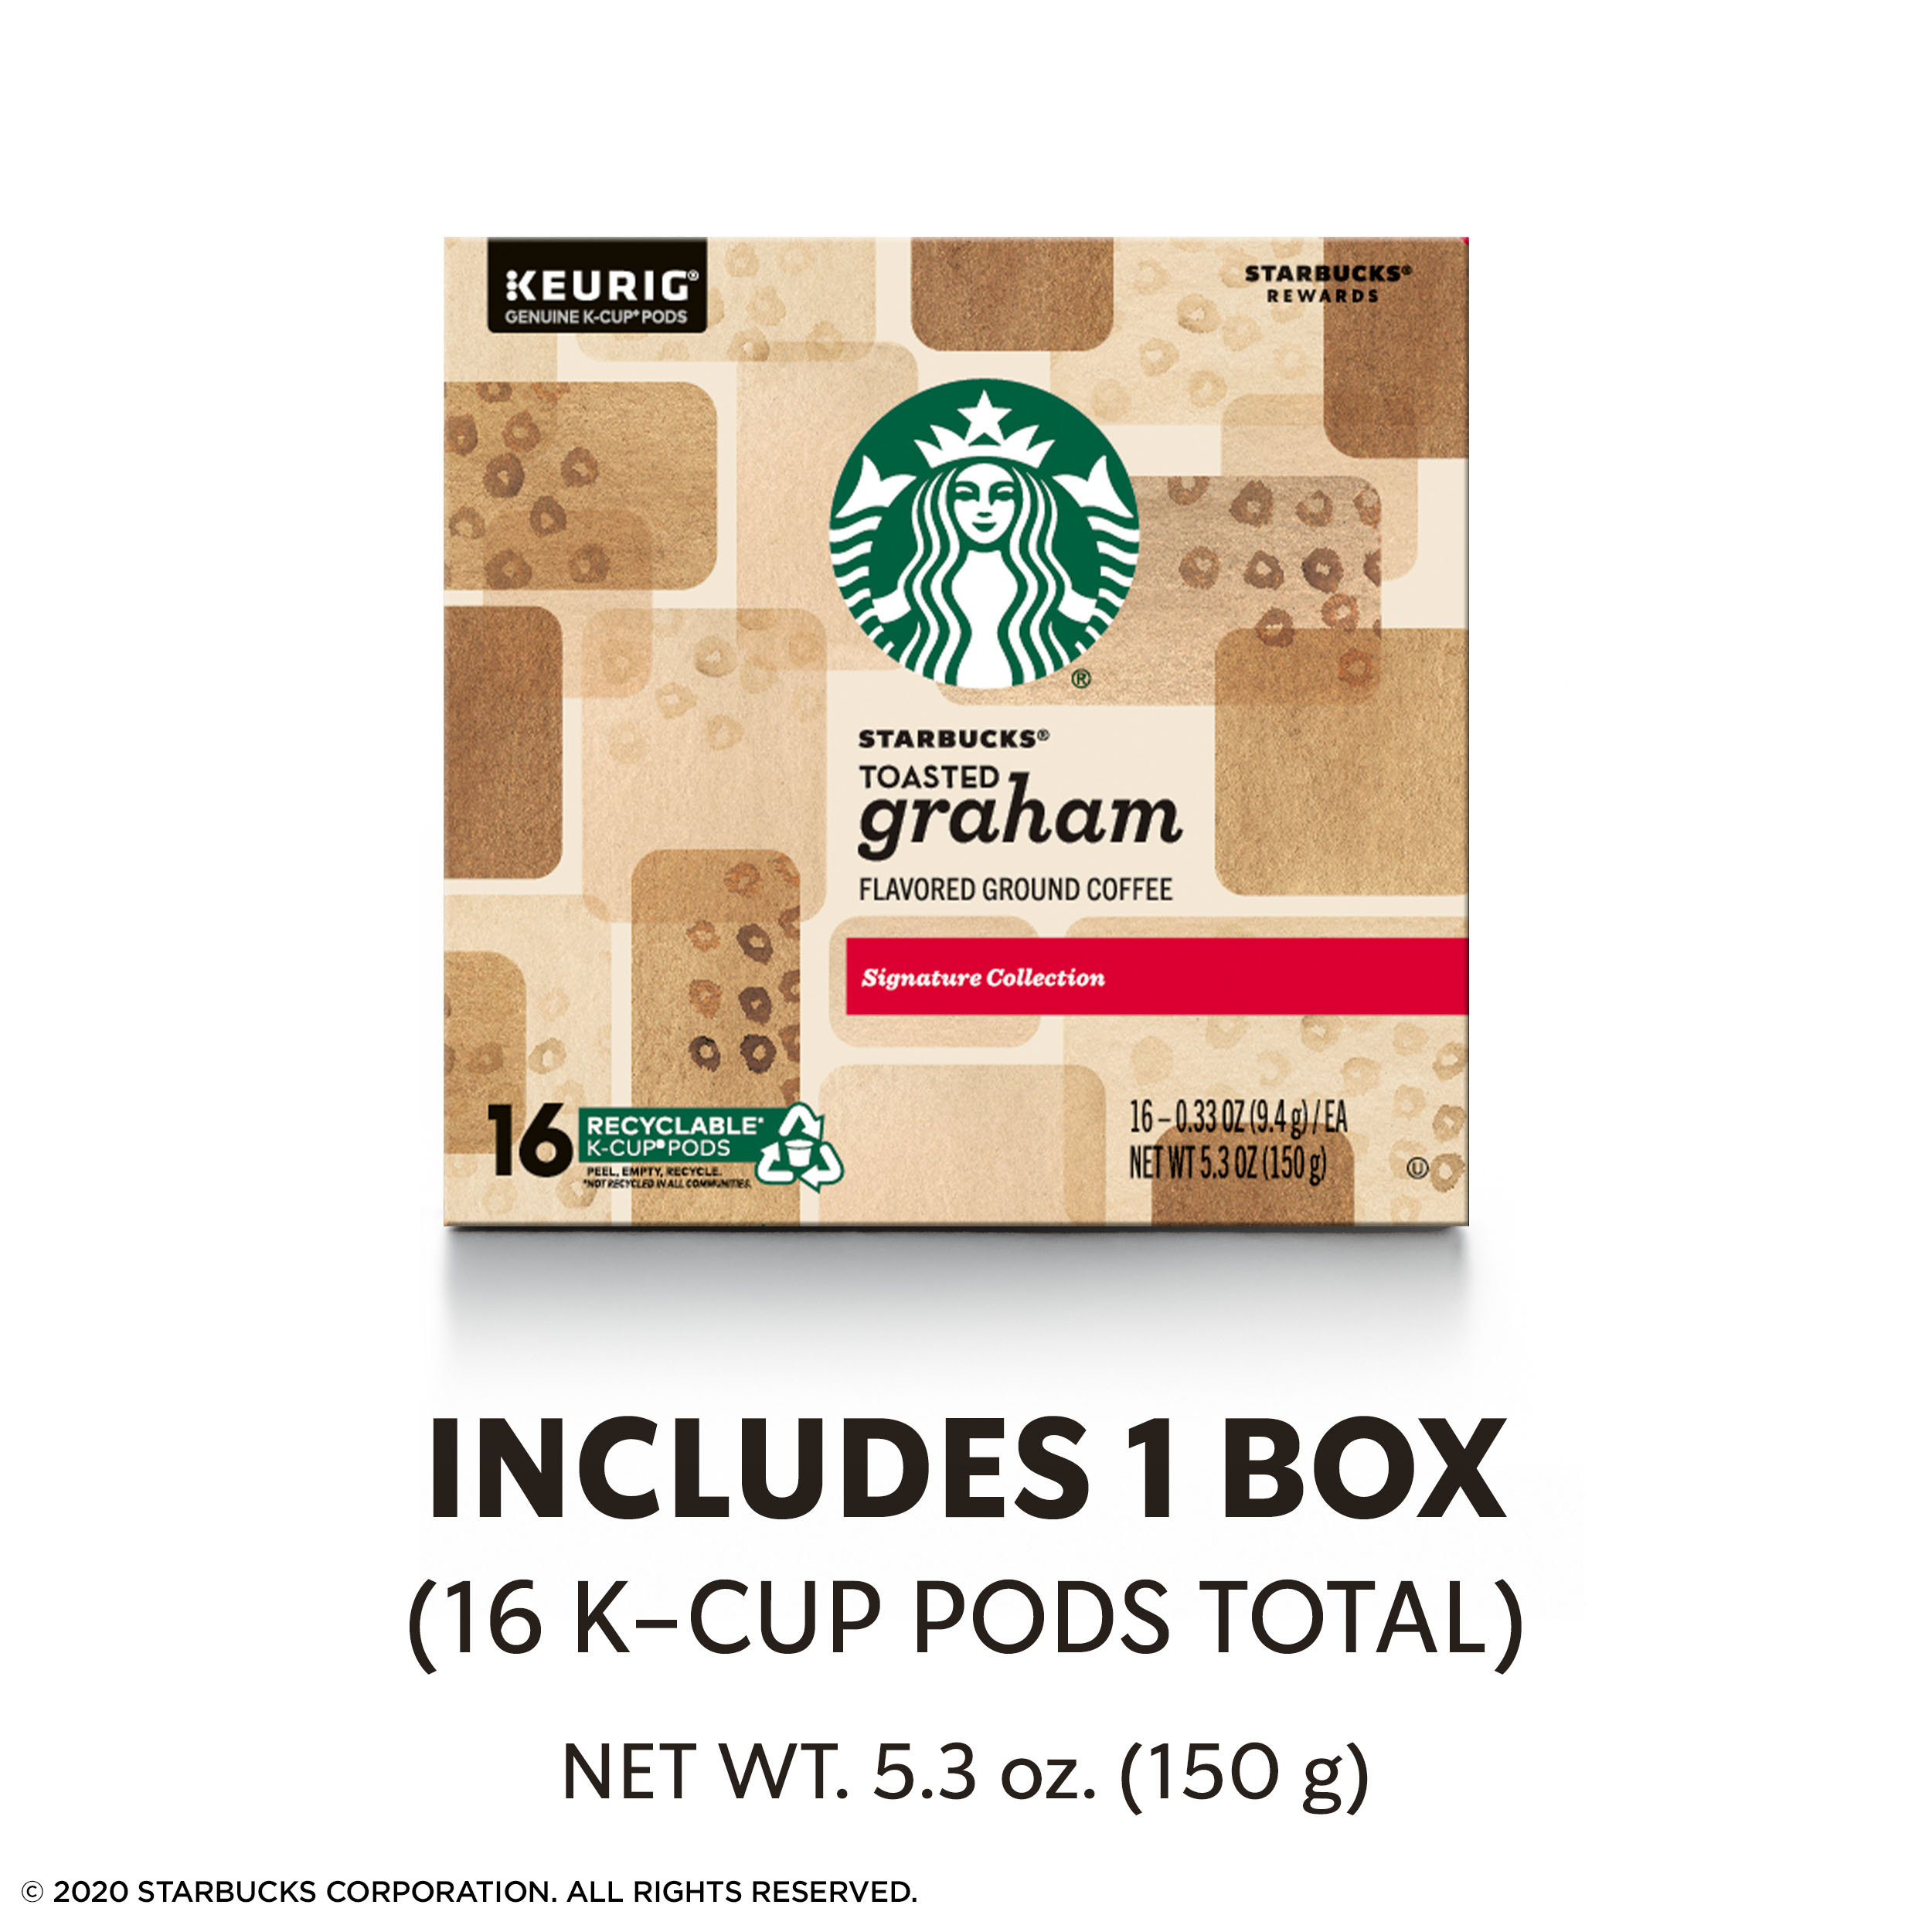 Starbucks Toasted Graham Keurig Coffee Pods, 16 Count Box - image 4 of 6